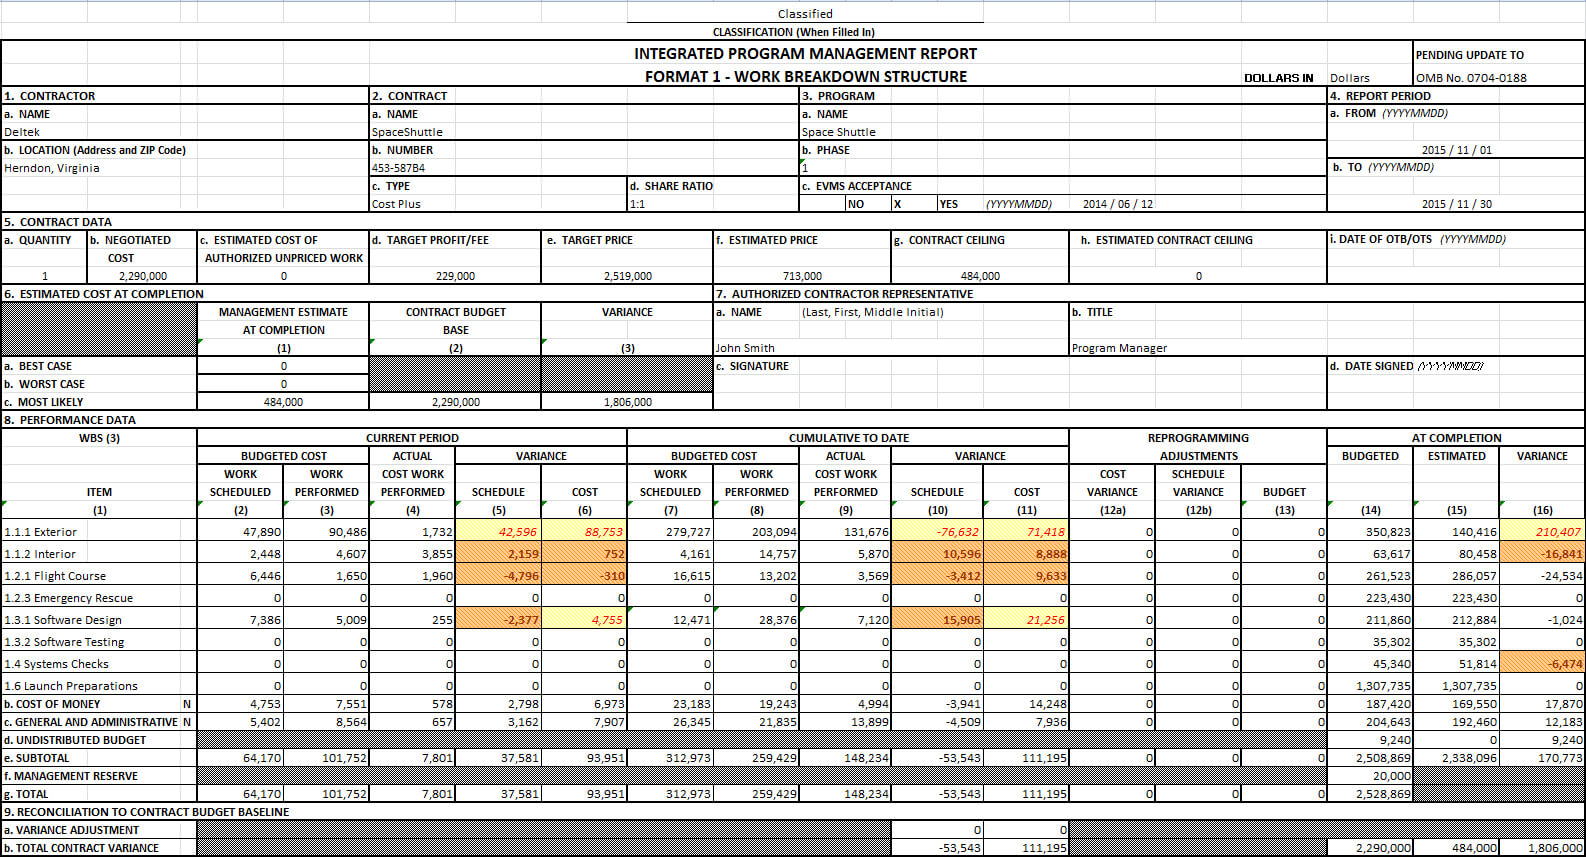 Ipmr Format Reports Explained (Integrated Program Management Inside Earned Value Report Template